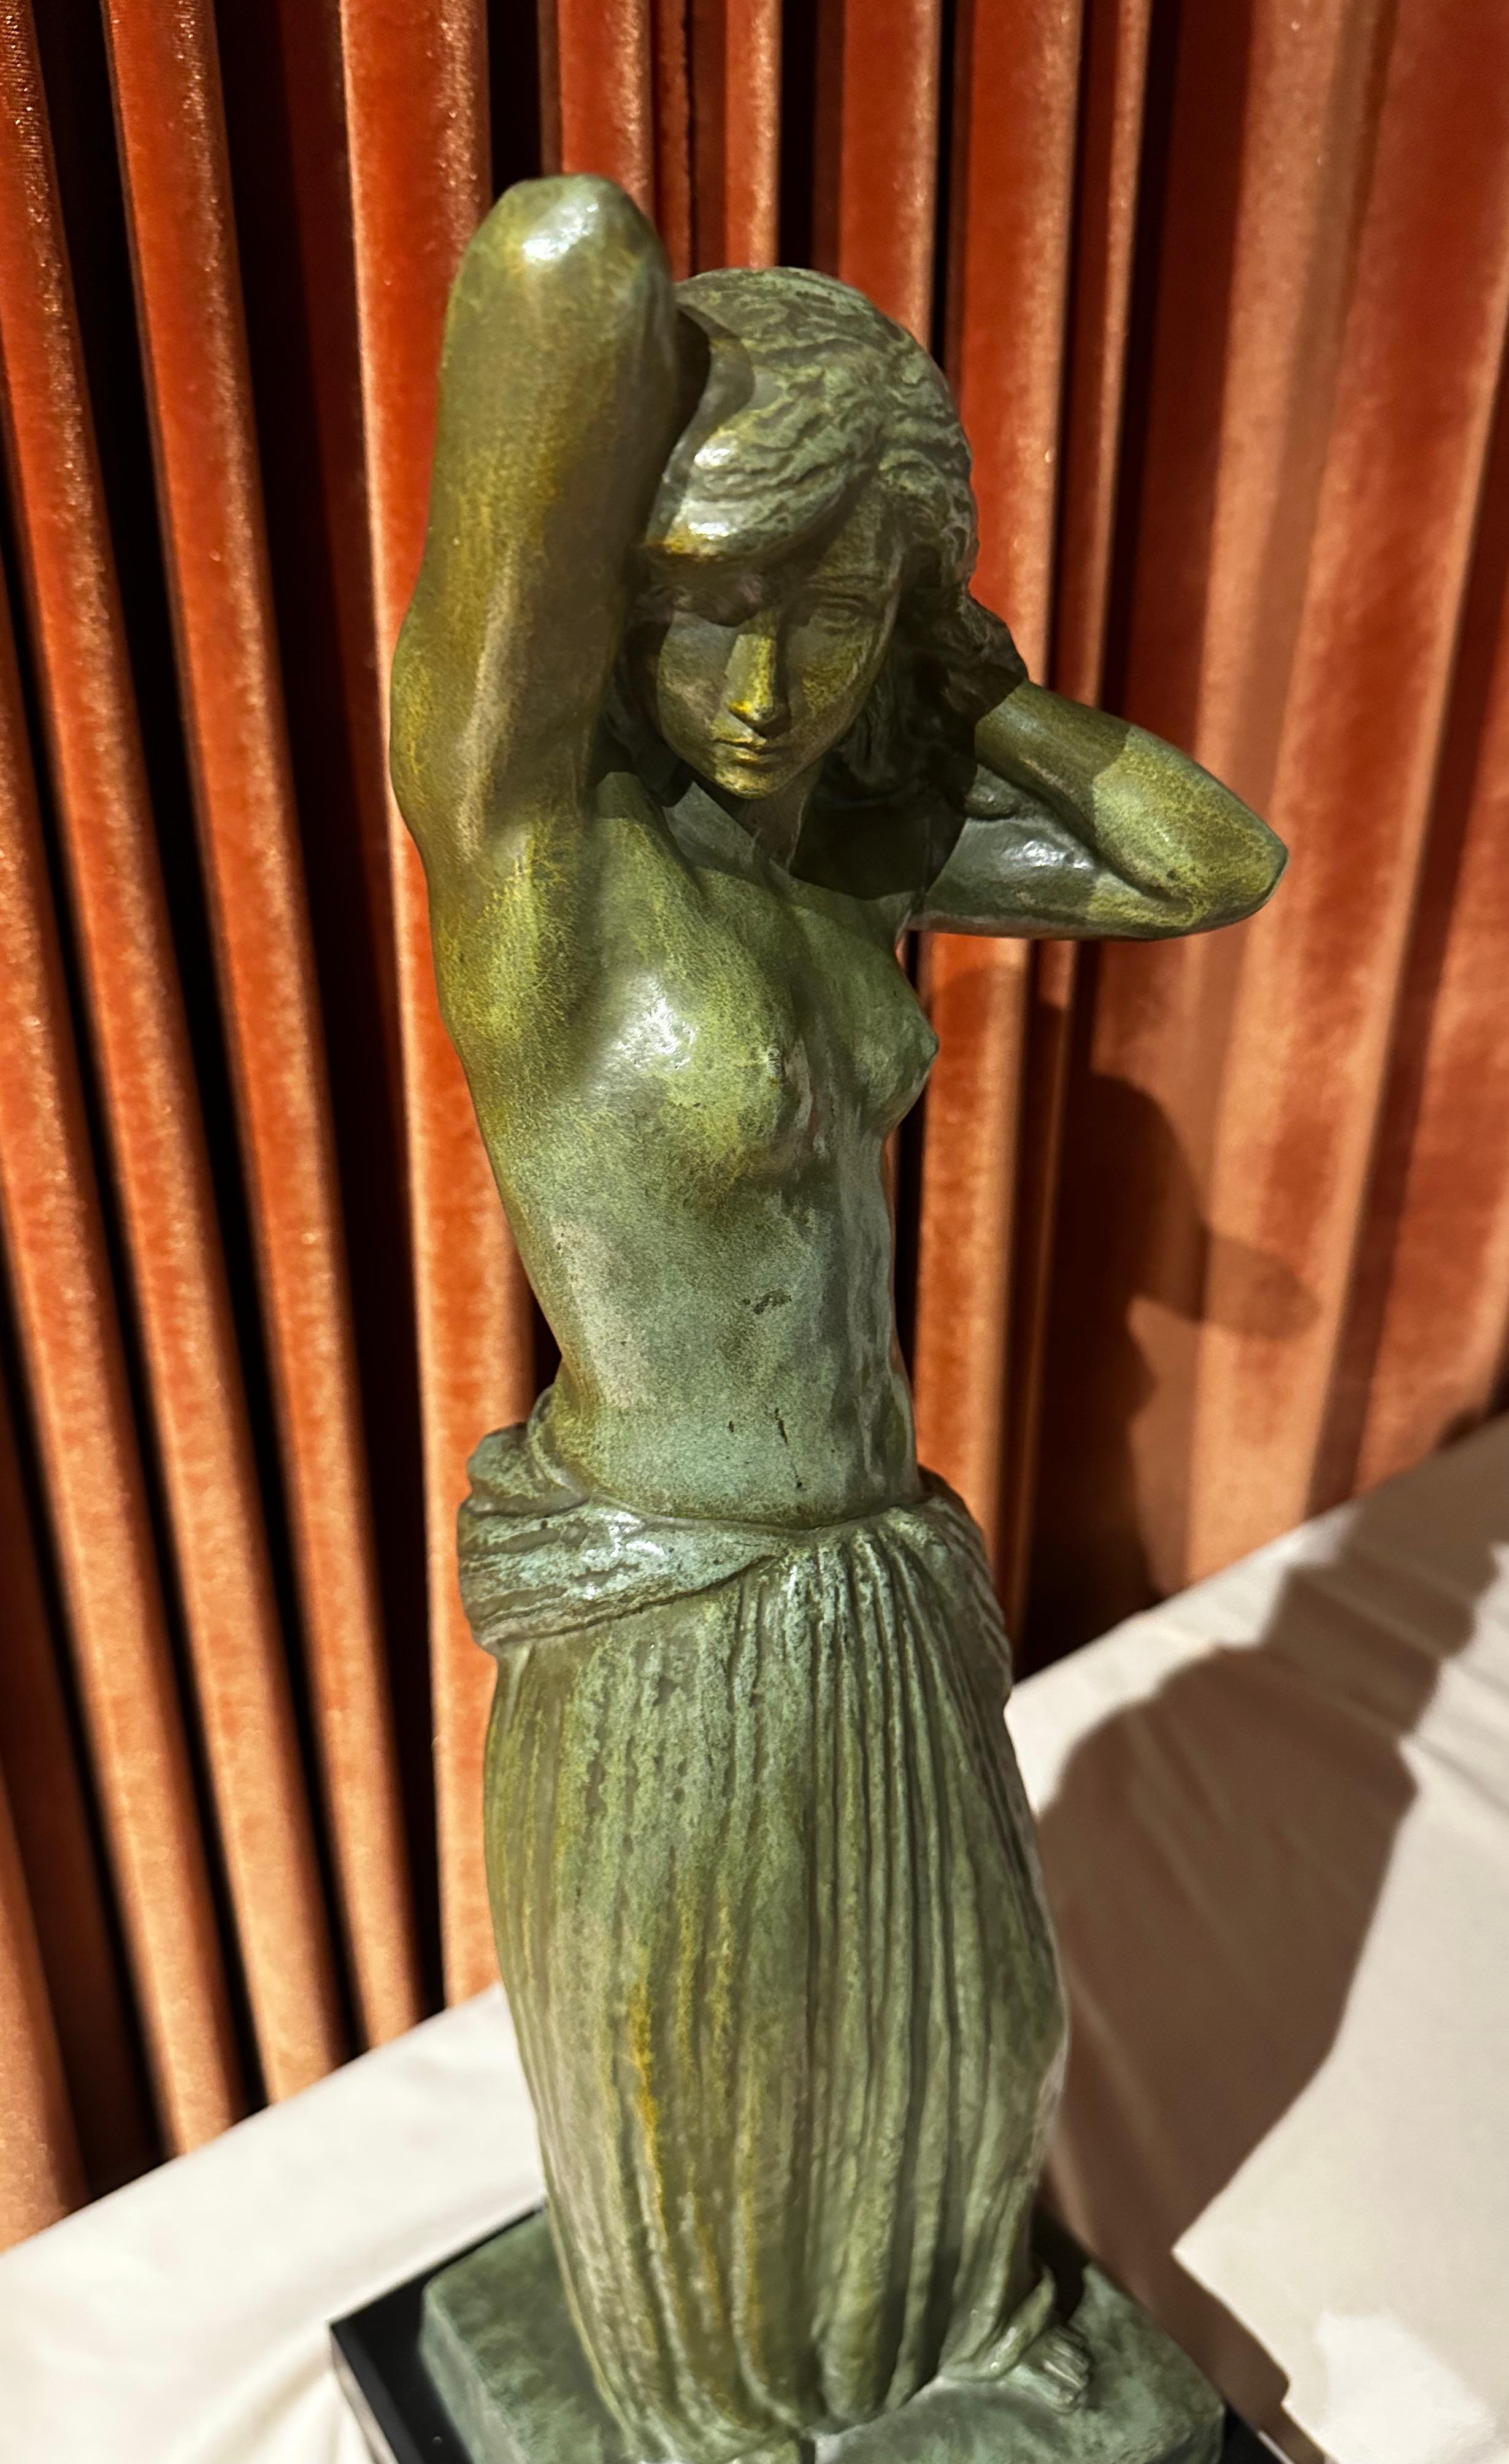 G Gori bronze Female draped nude statue Classic Art Deco made in France. A verdigris green patinated bronze sculpture depicting a bare-breasted female standing with hands behind her head mounted on a marble base. 1925-1930 stylized pose with fine